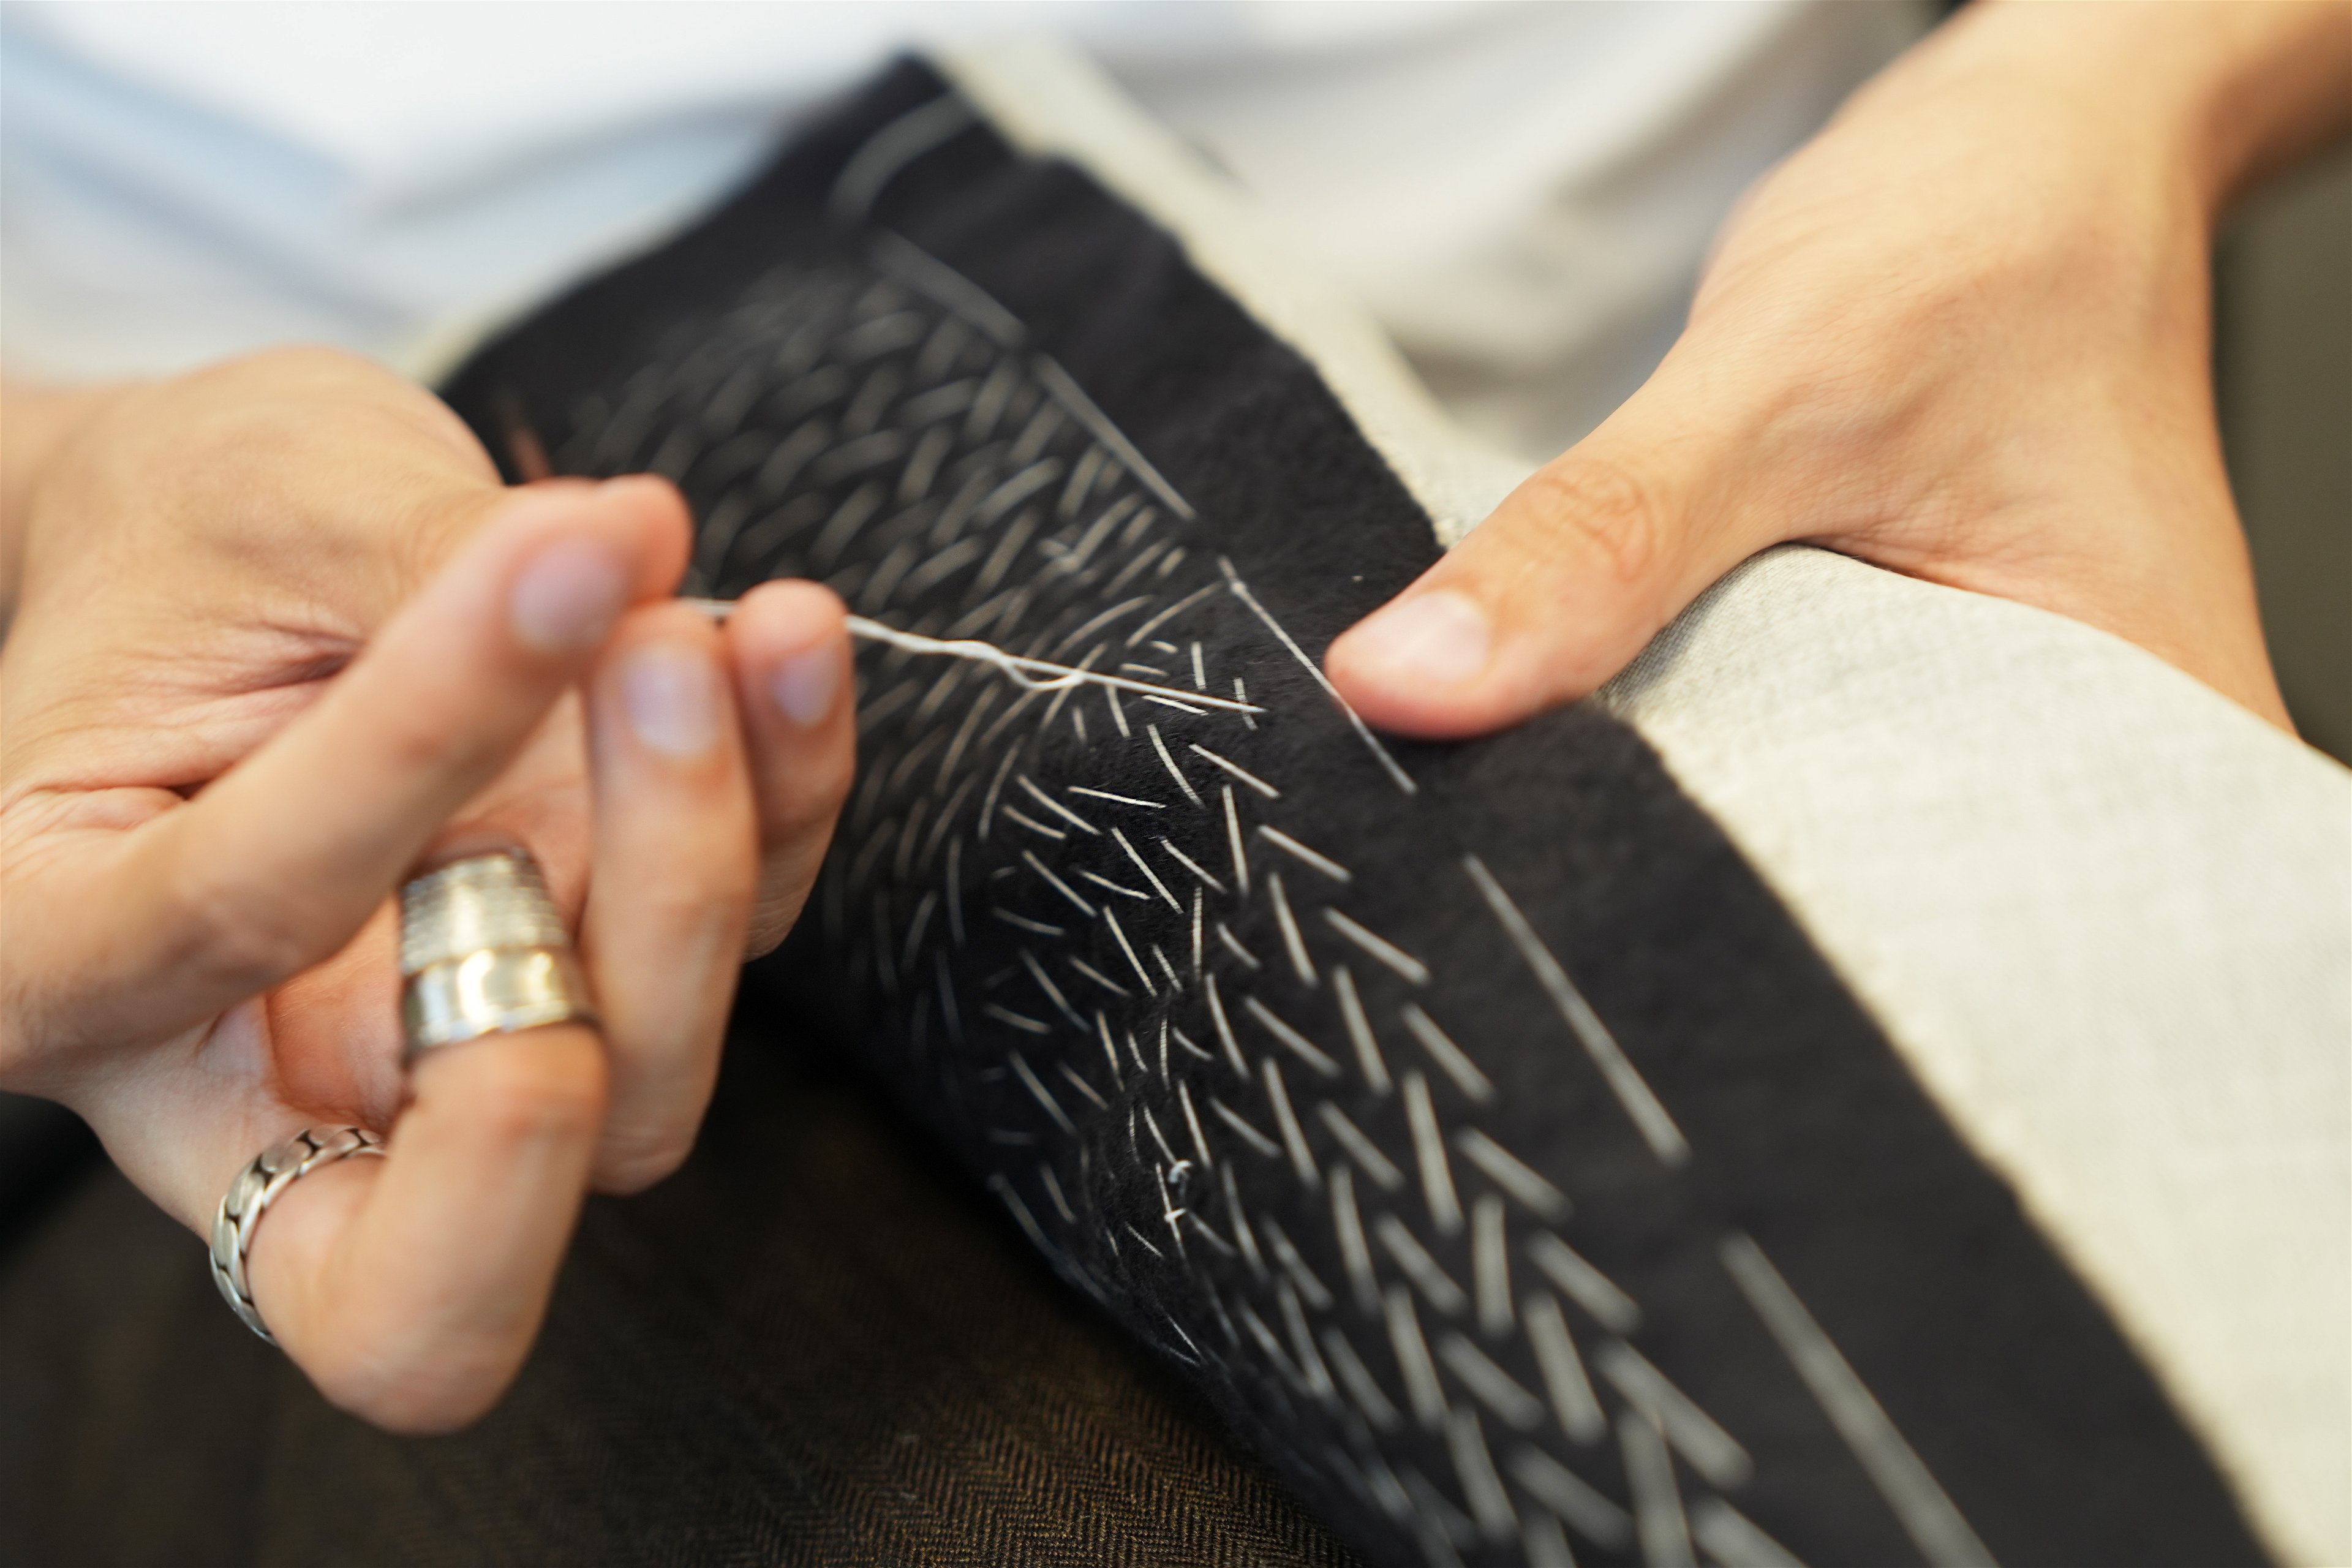 Full-Time Course : Advanced Course in Bespoke Tailoring and Cutting 